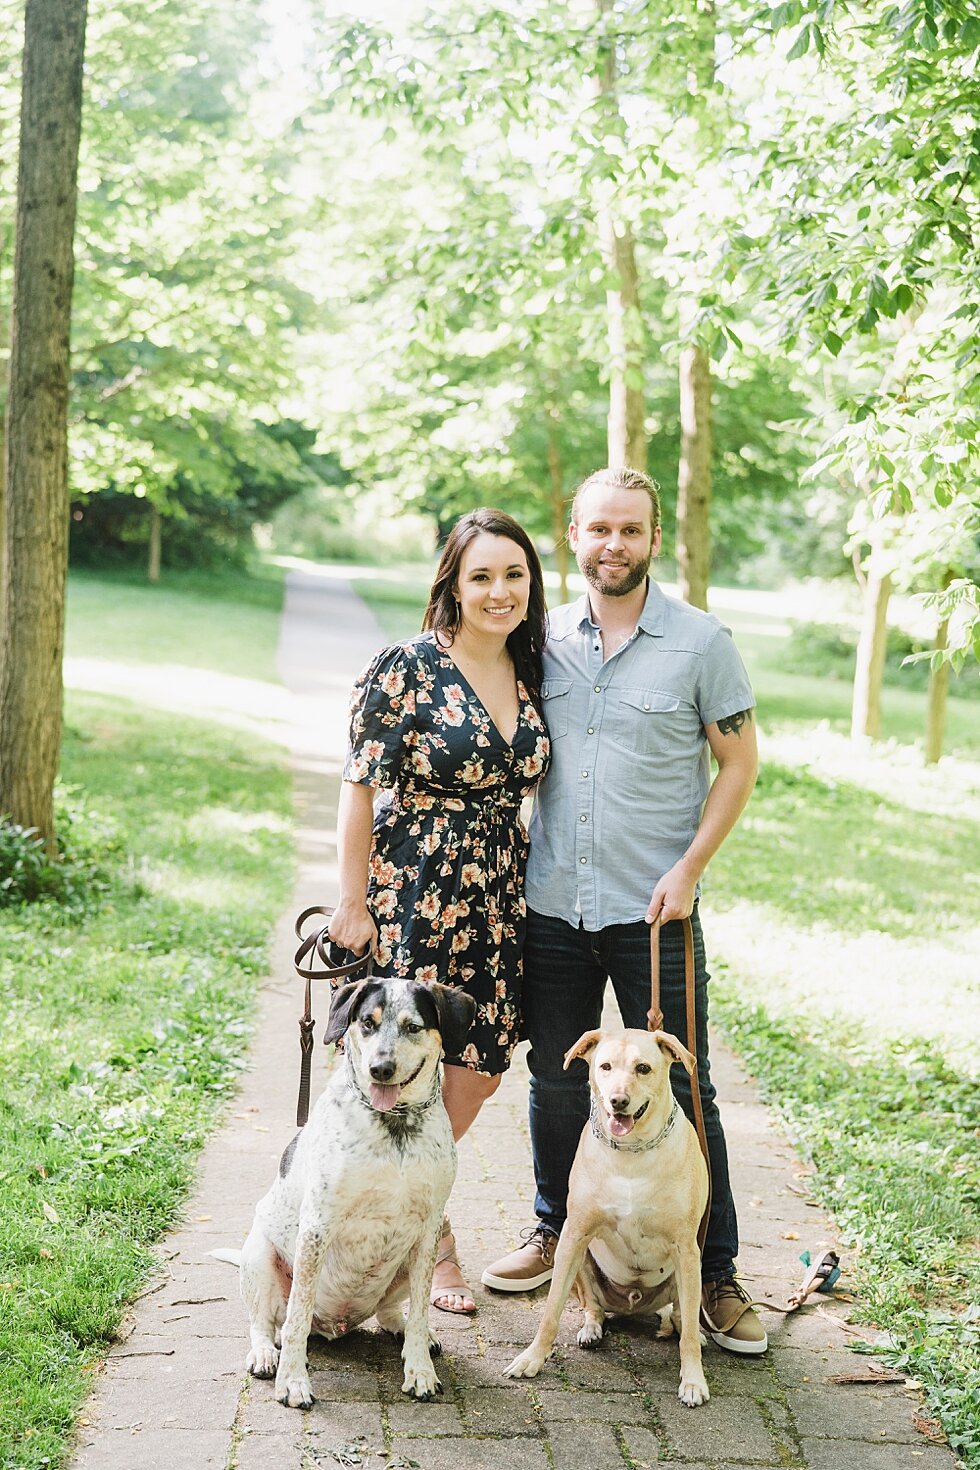  Engaged couple and their two furry family members at their summer engagement session in Kentucky. #engagementgoals #engagementphotographer #engaged #outdoorengagement #kentuckyphotographer #indianaphotographer #louisvillephotographer #engagementphot